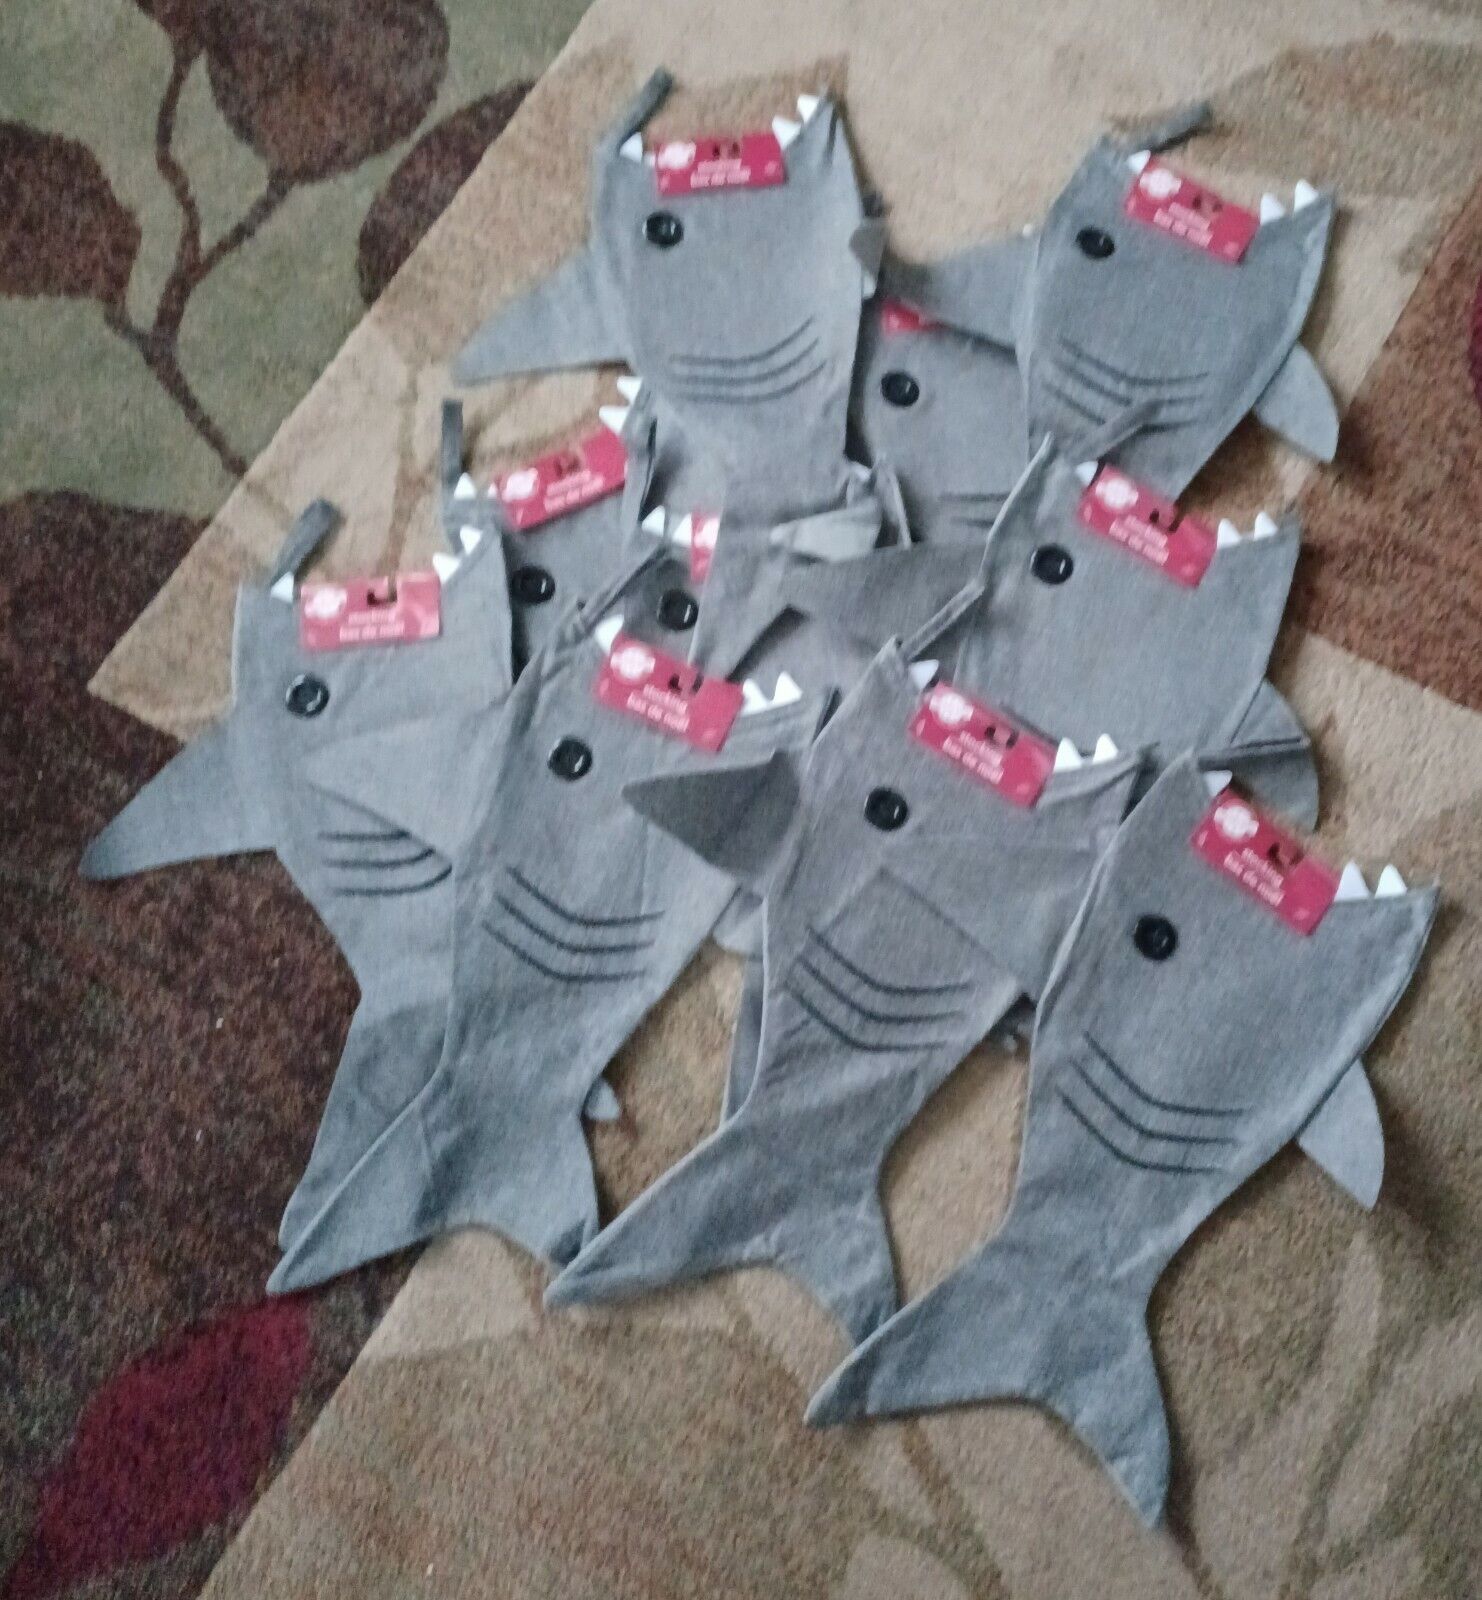 10 Limited 5% OFF price Shark xmas stockings decor bags new gift